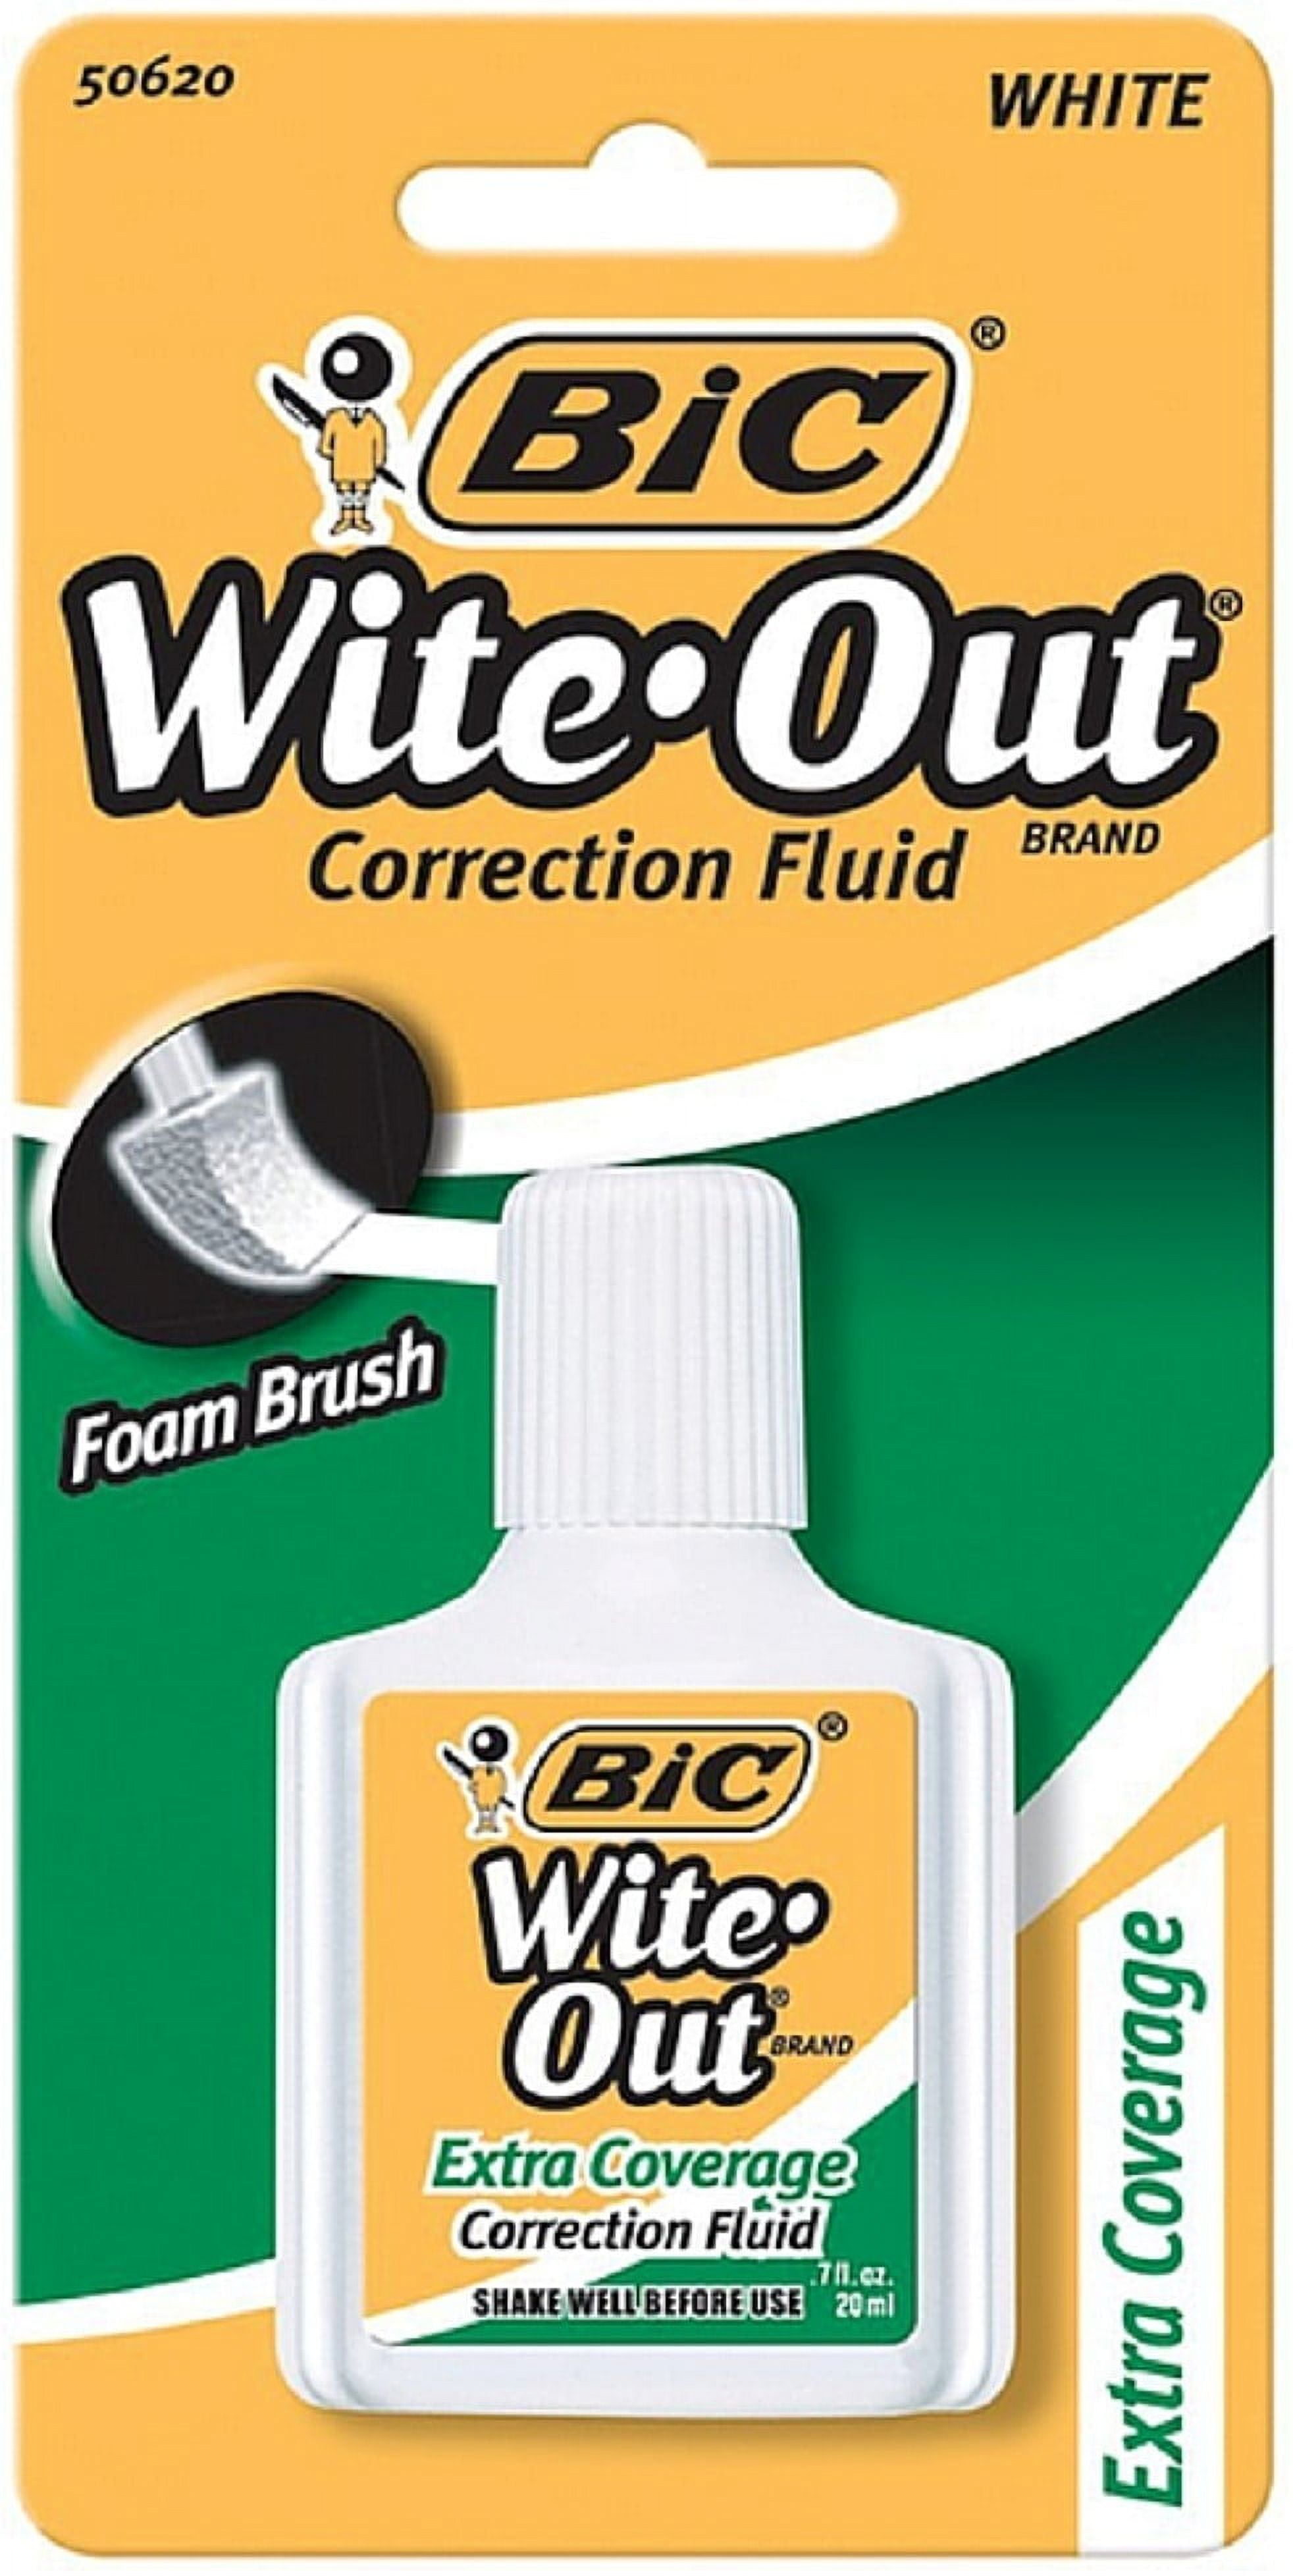 Bic Wite-Out Quick Dry Correction Fluid, 20 ml Bottle, White, 2/Pack